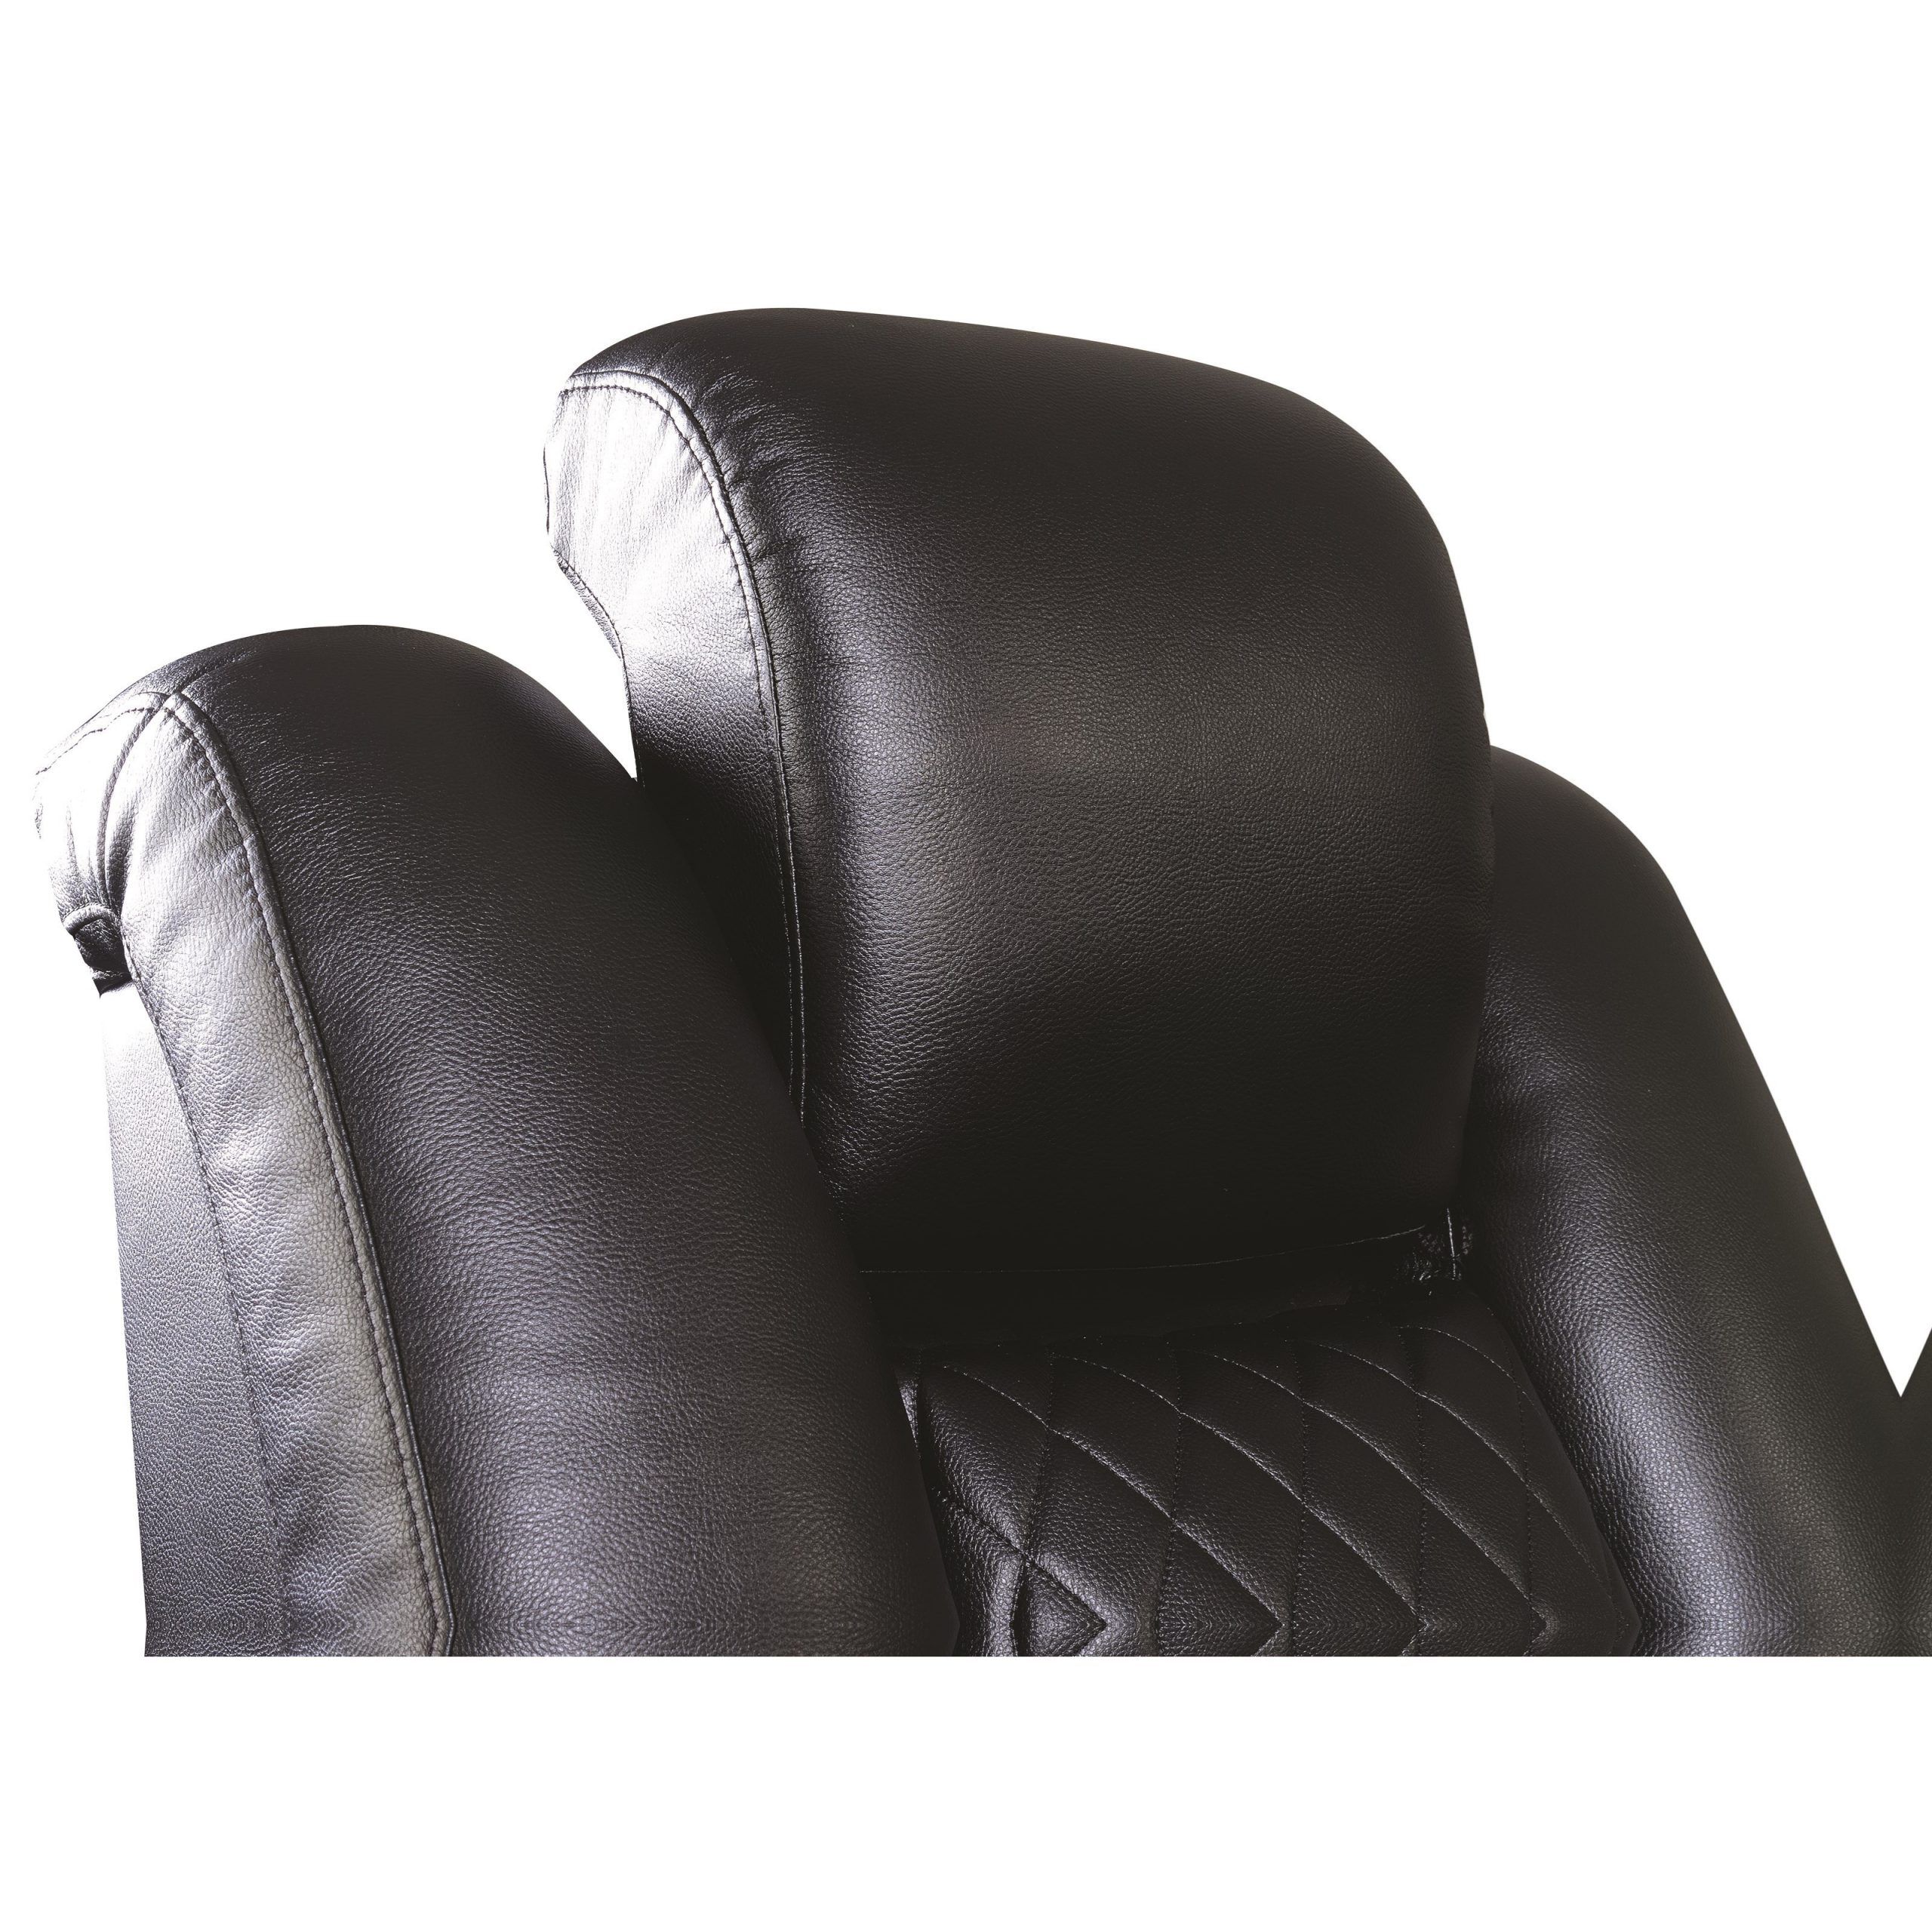 Delangelo Theater Power Leather Reclining Sofa With Cup Holders In Espresso Faux Leather Ac And Usb Ottomans (View 8 of 20)